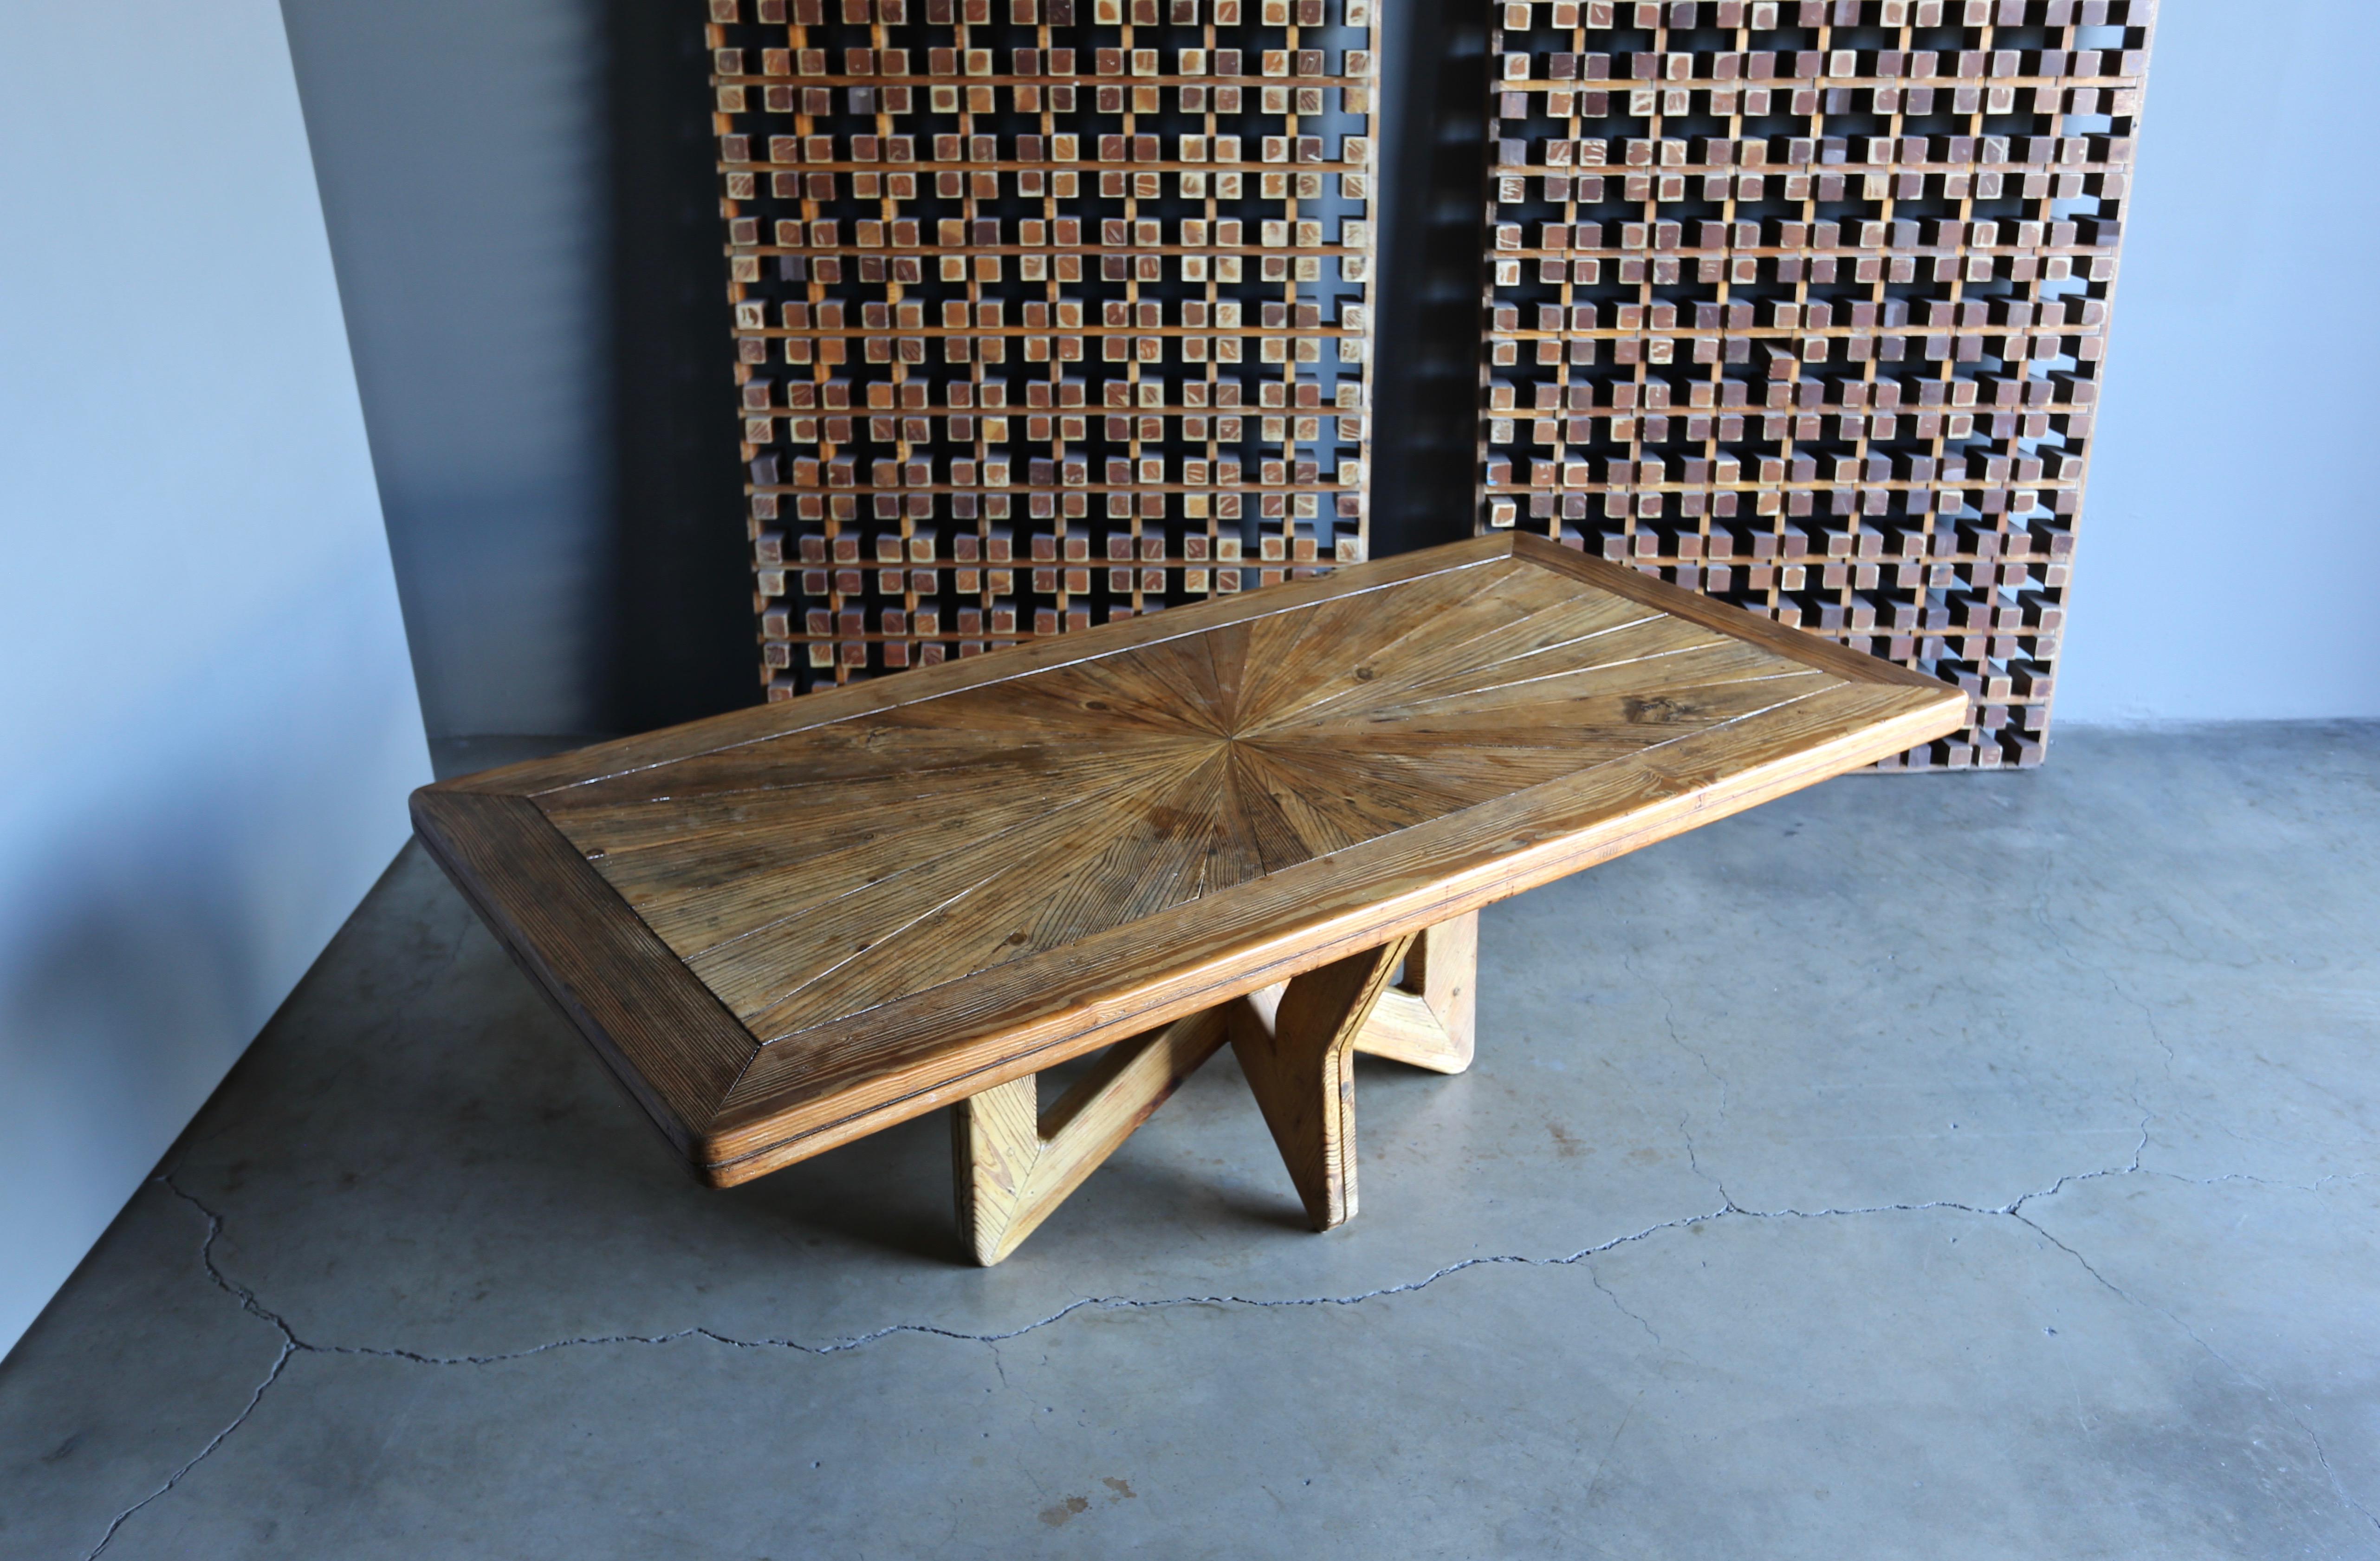 Sculptural Studio crafted pine dining table, Dominican Republic circa 1950. Signed 